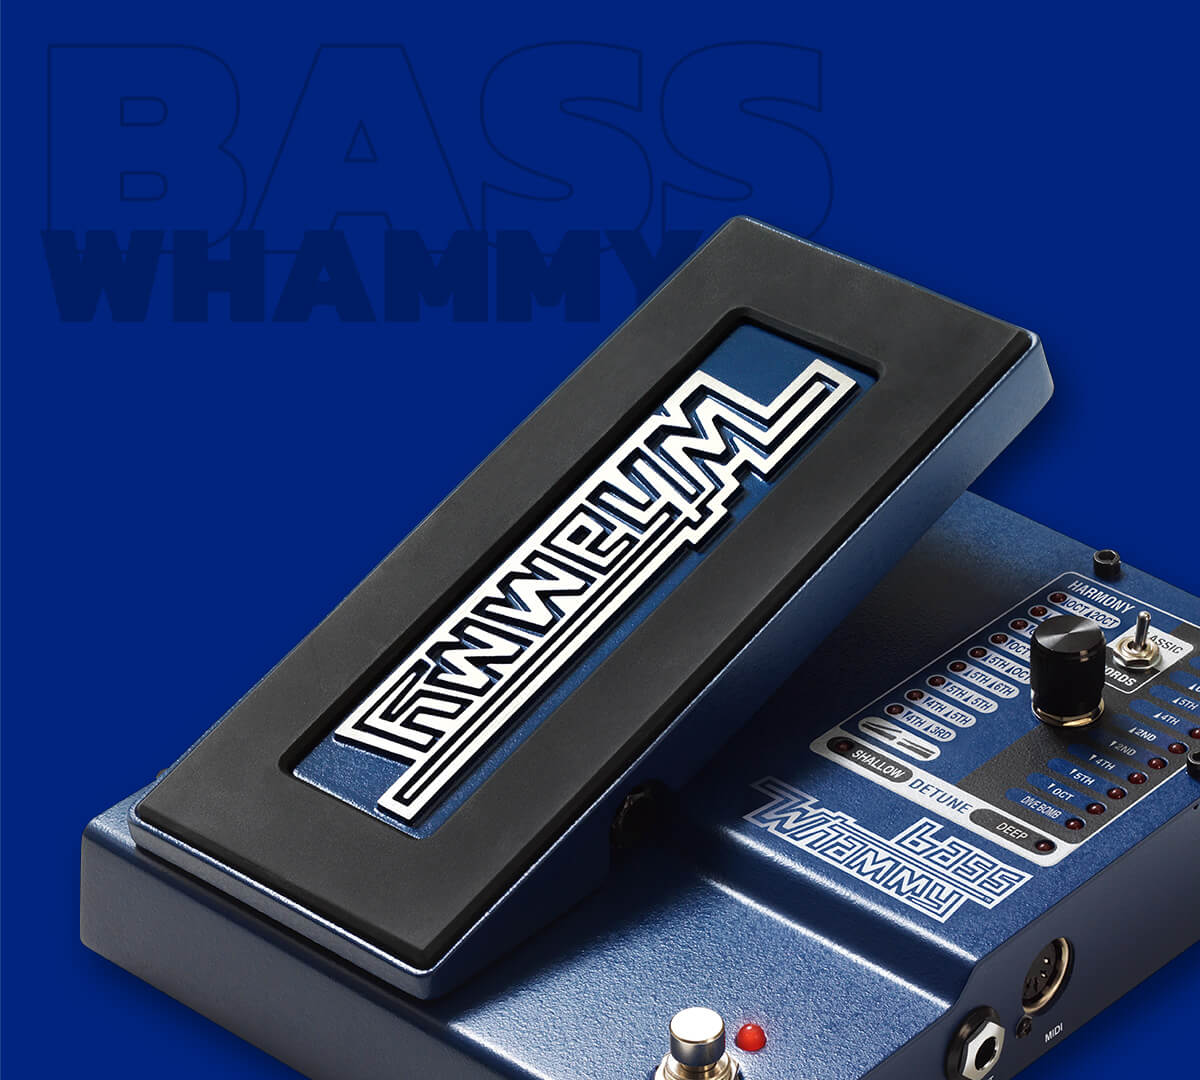 DigiTech Bass Whammy pitch shifting effect pedal in blue with blue background and graphics that says 